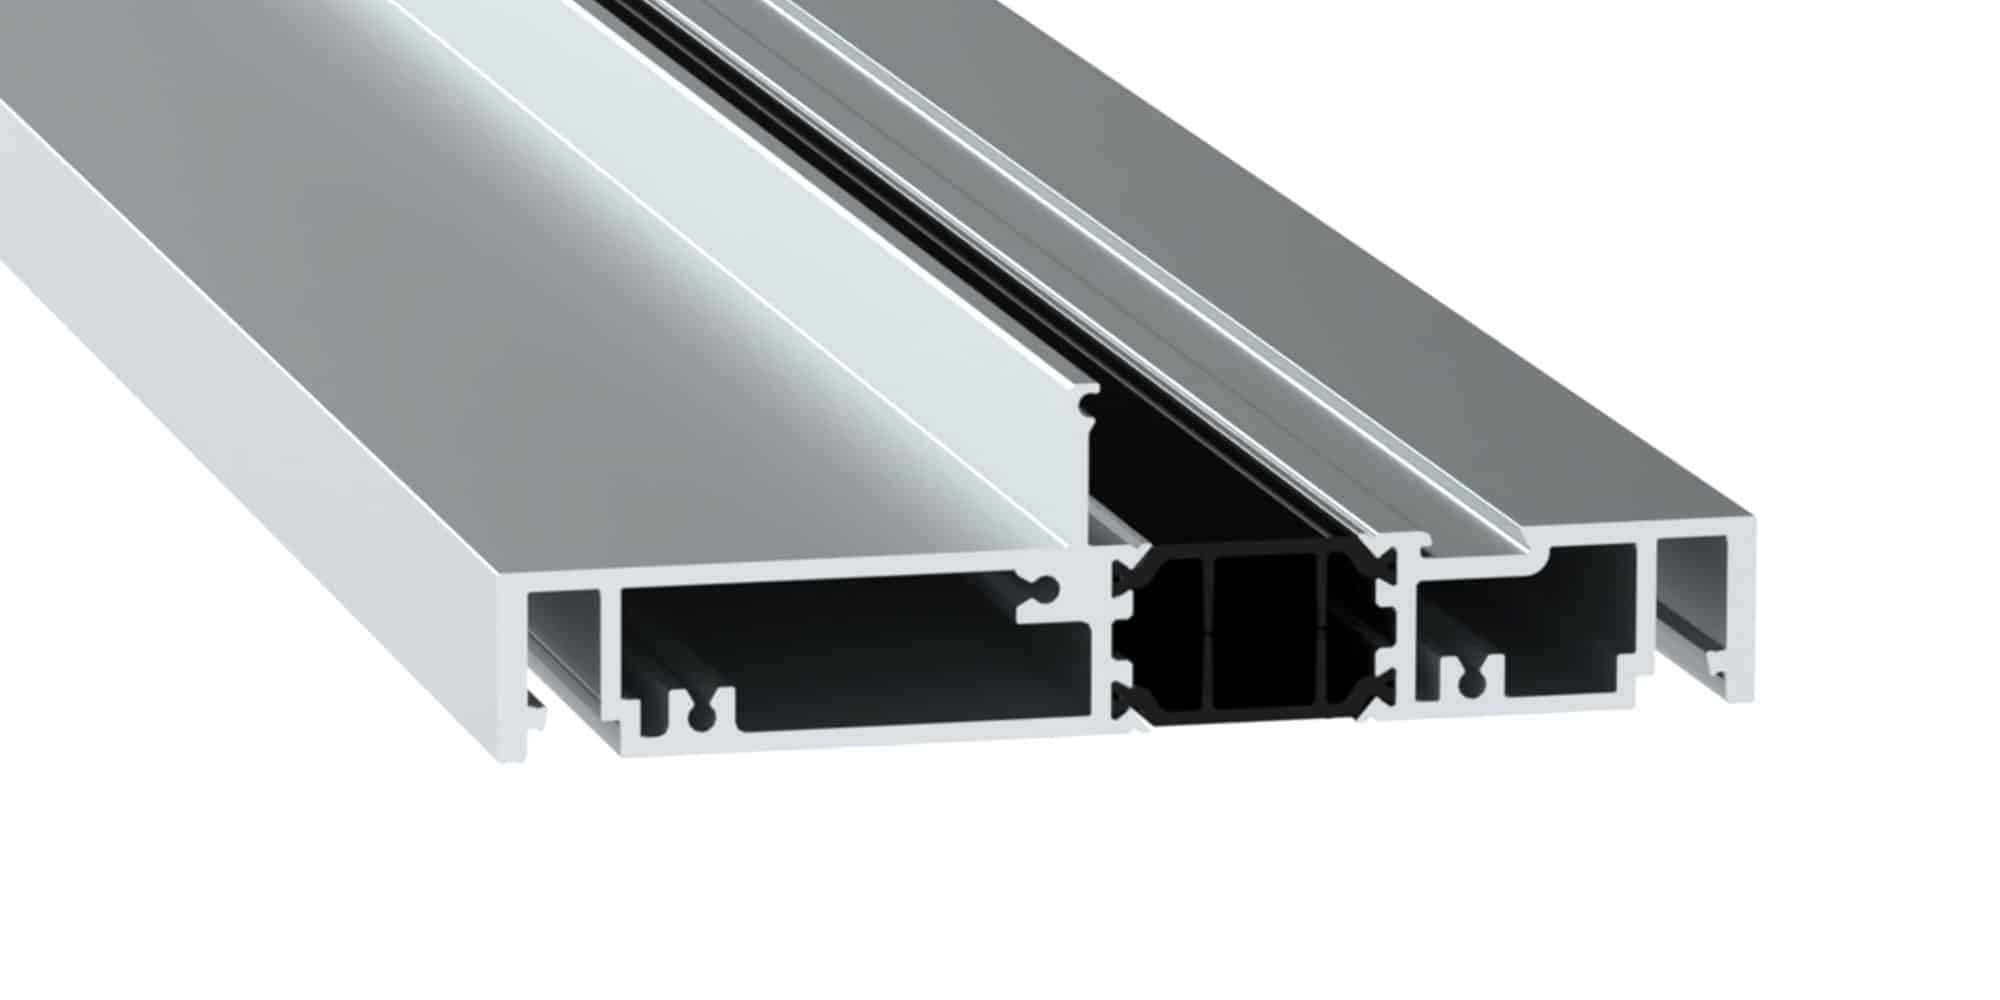 An image of a standard base sill for the 7630 Window Wall.